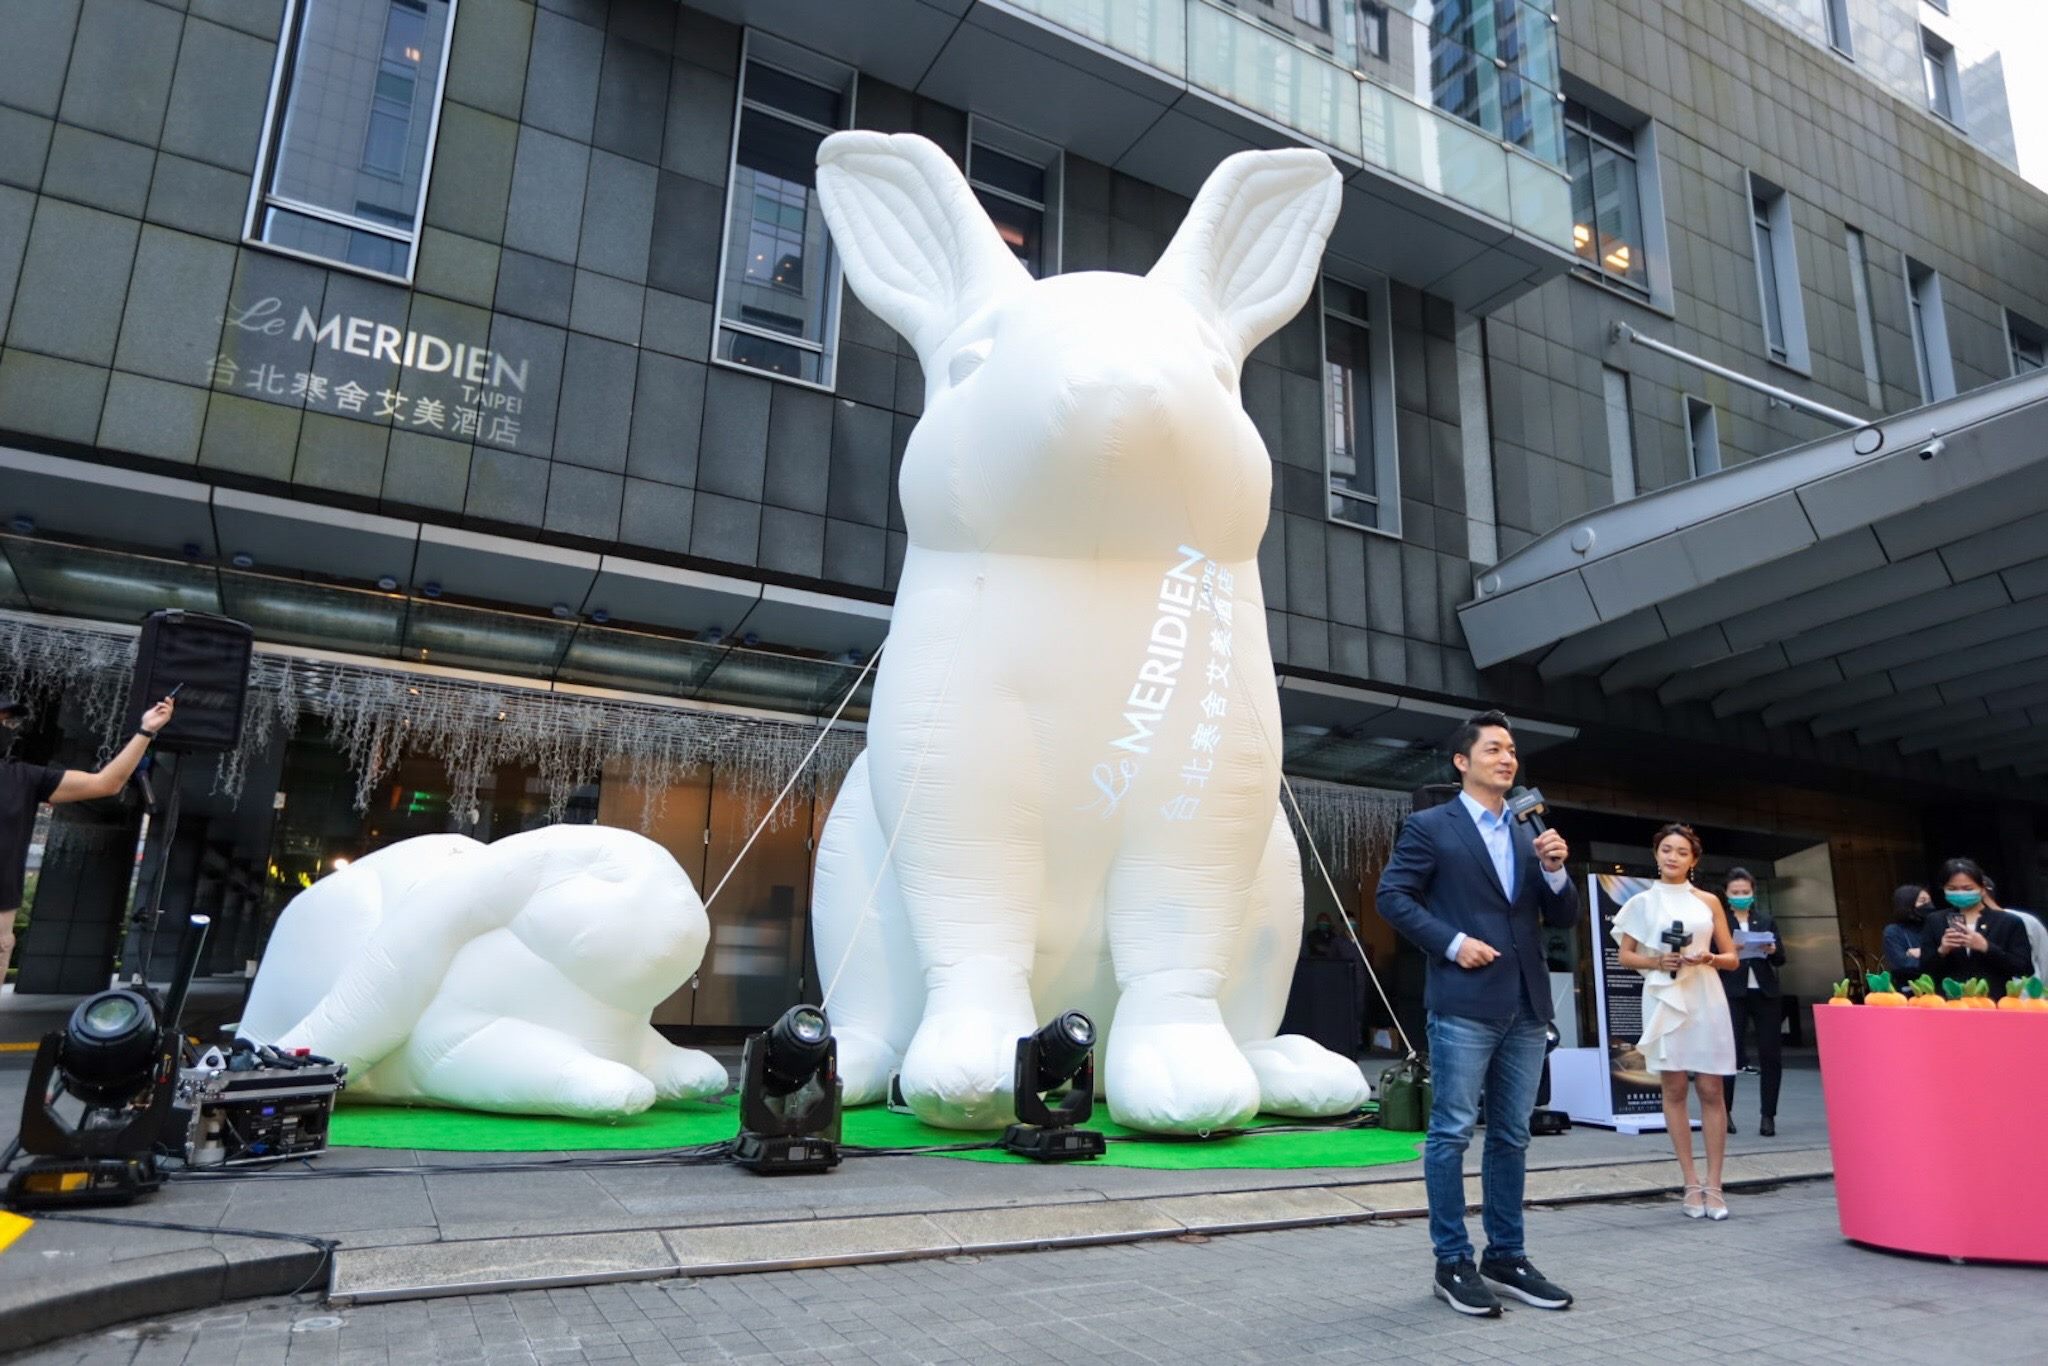 The mayor standing in front of the rabbit lantern outside Meridien Taipei